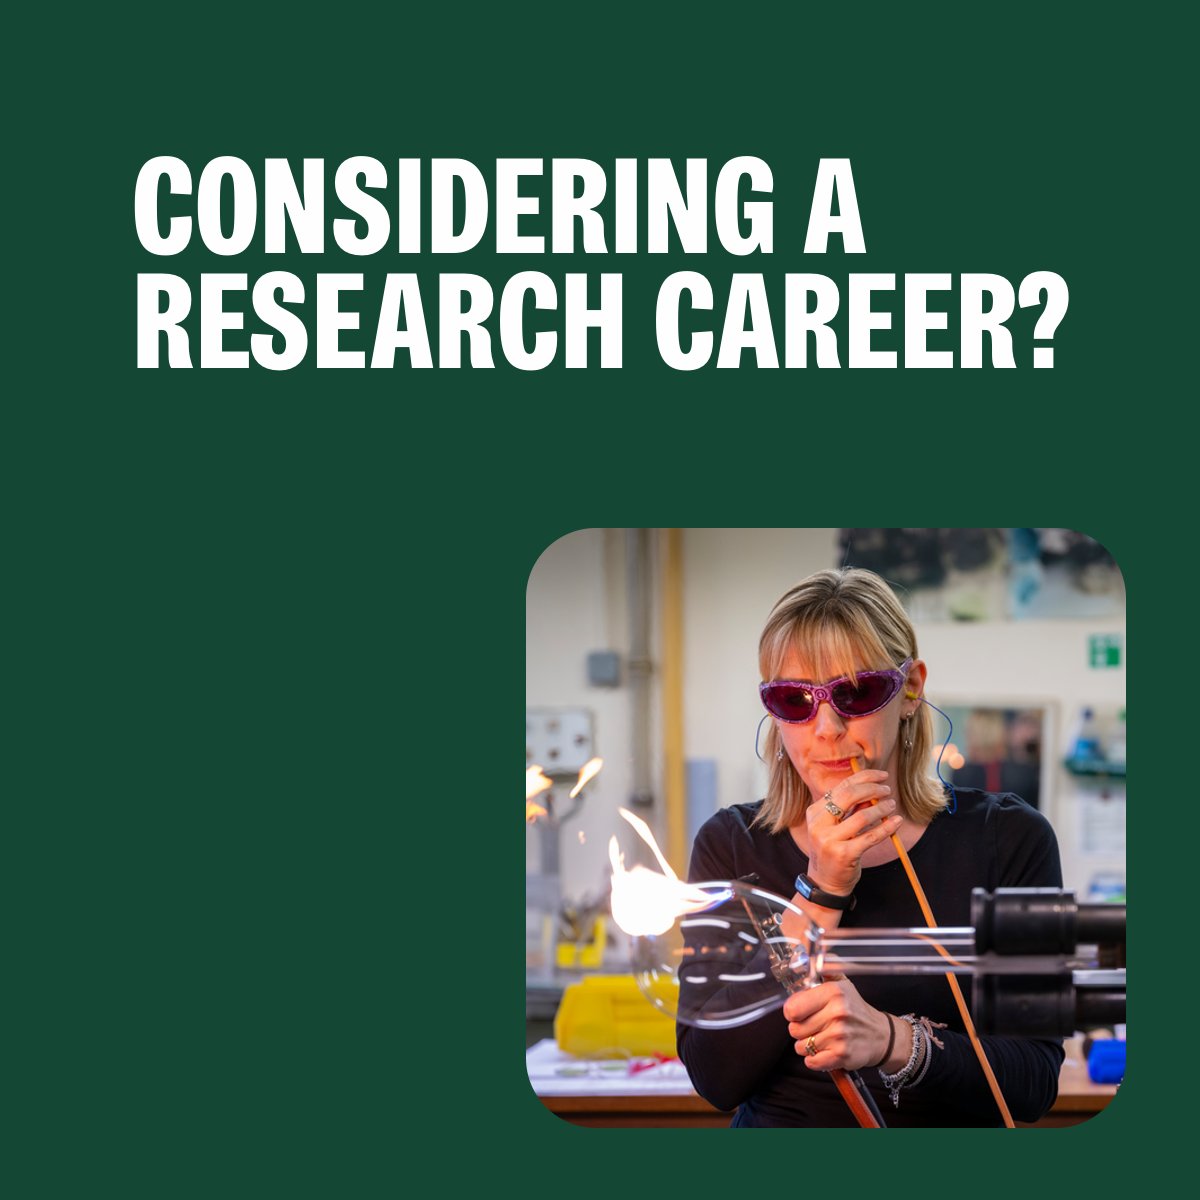 Considering a career in research? Not sure what direction you want to take? Join us for our Working in Research event next week, to hear from experts from a variety of research backgrounds. Book your free place at this event now: tinyurl.com/yfc6ekvn